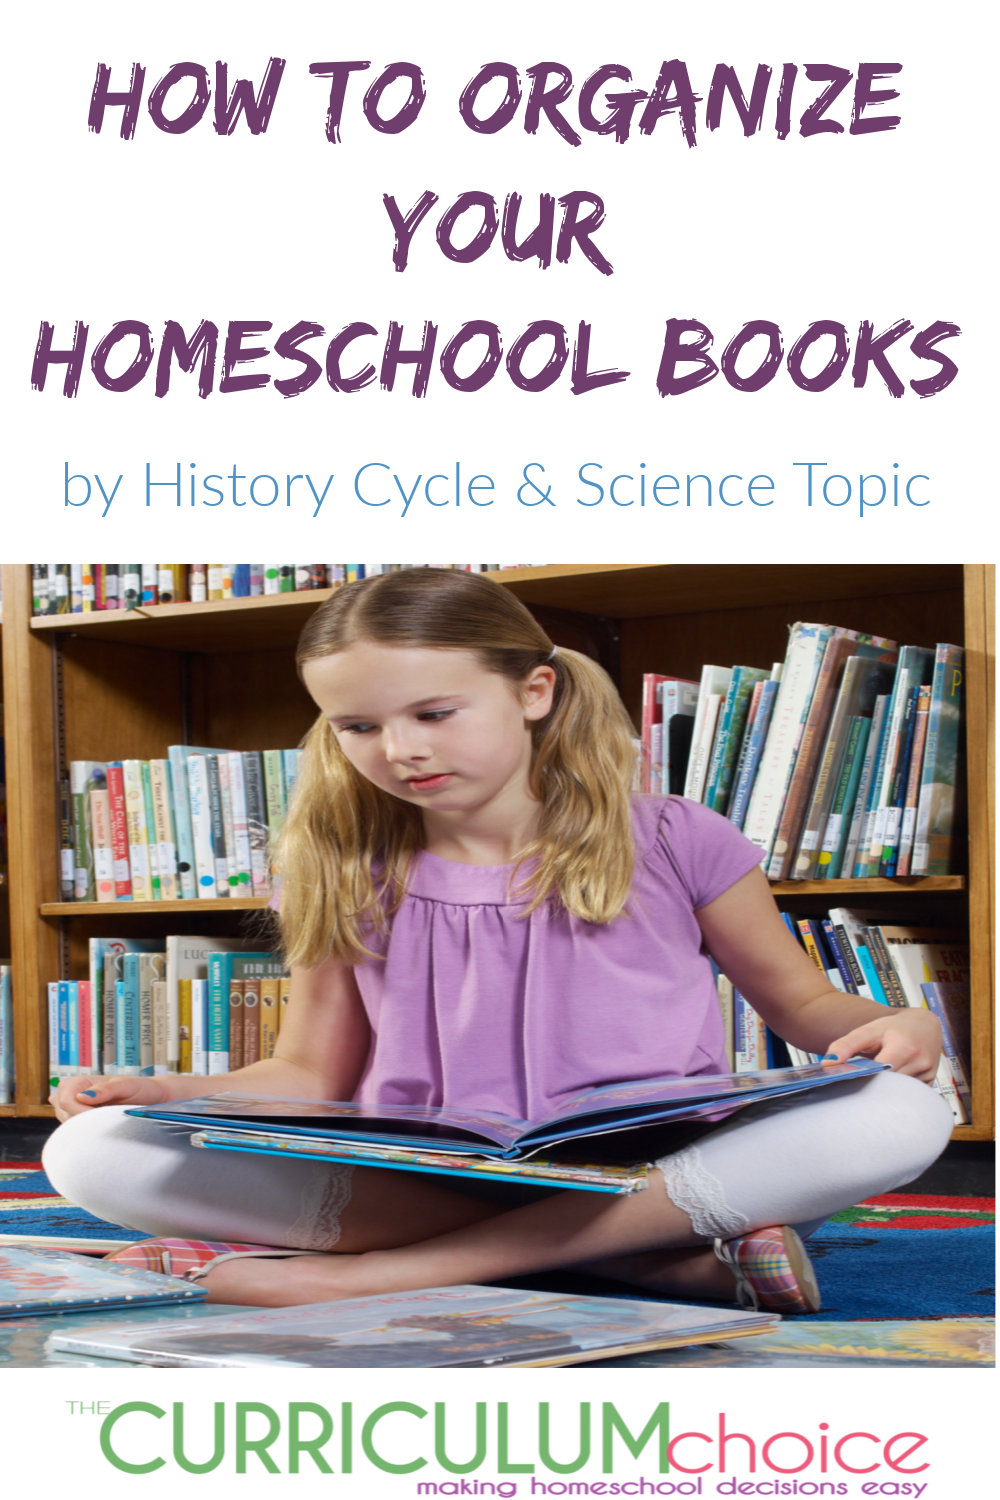 Make better use of your book collection by organizing your homeschool books by history period and 4 year science cycle.